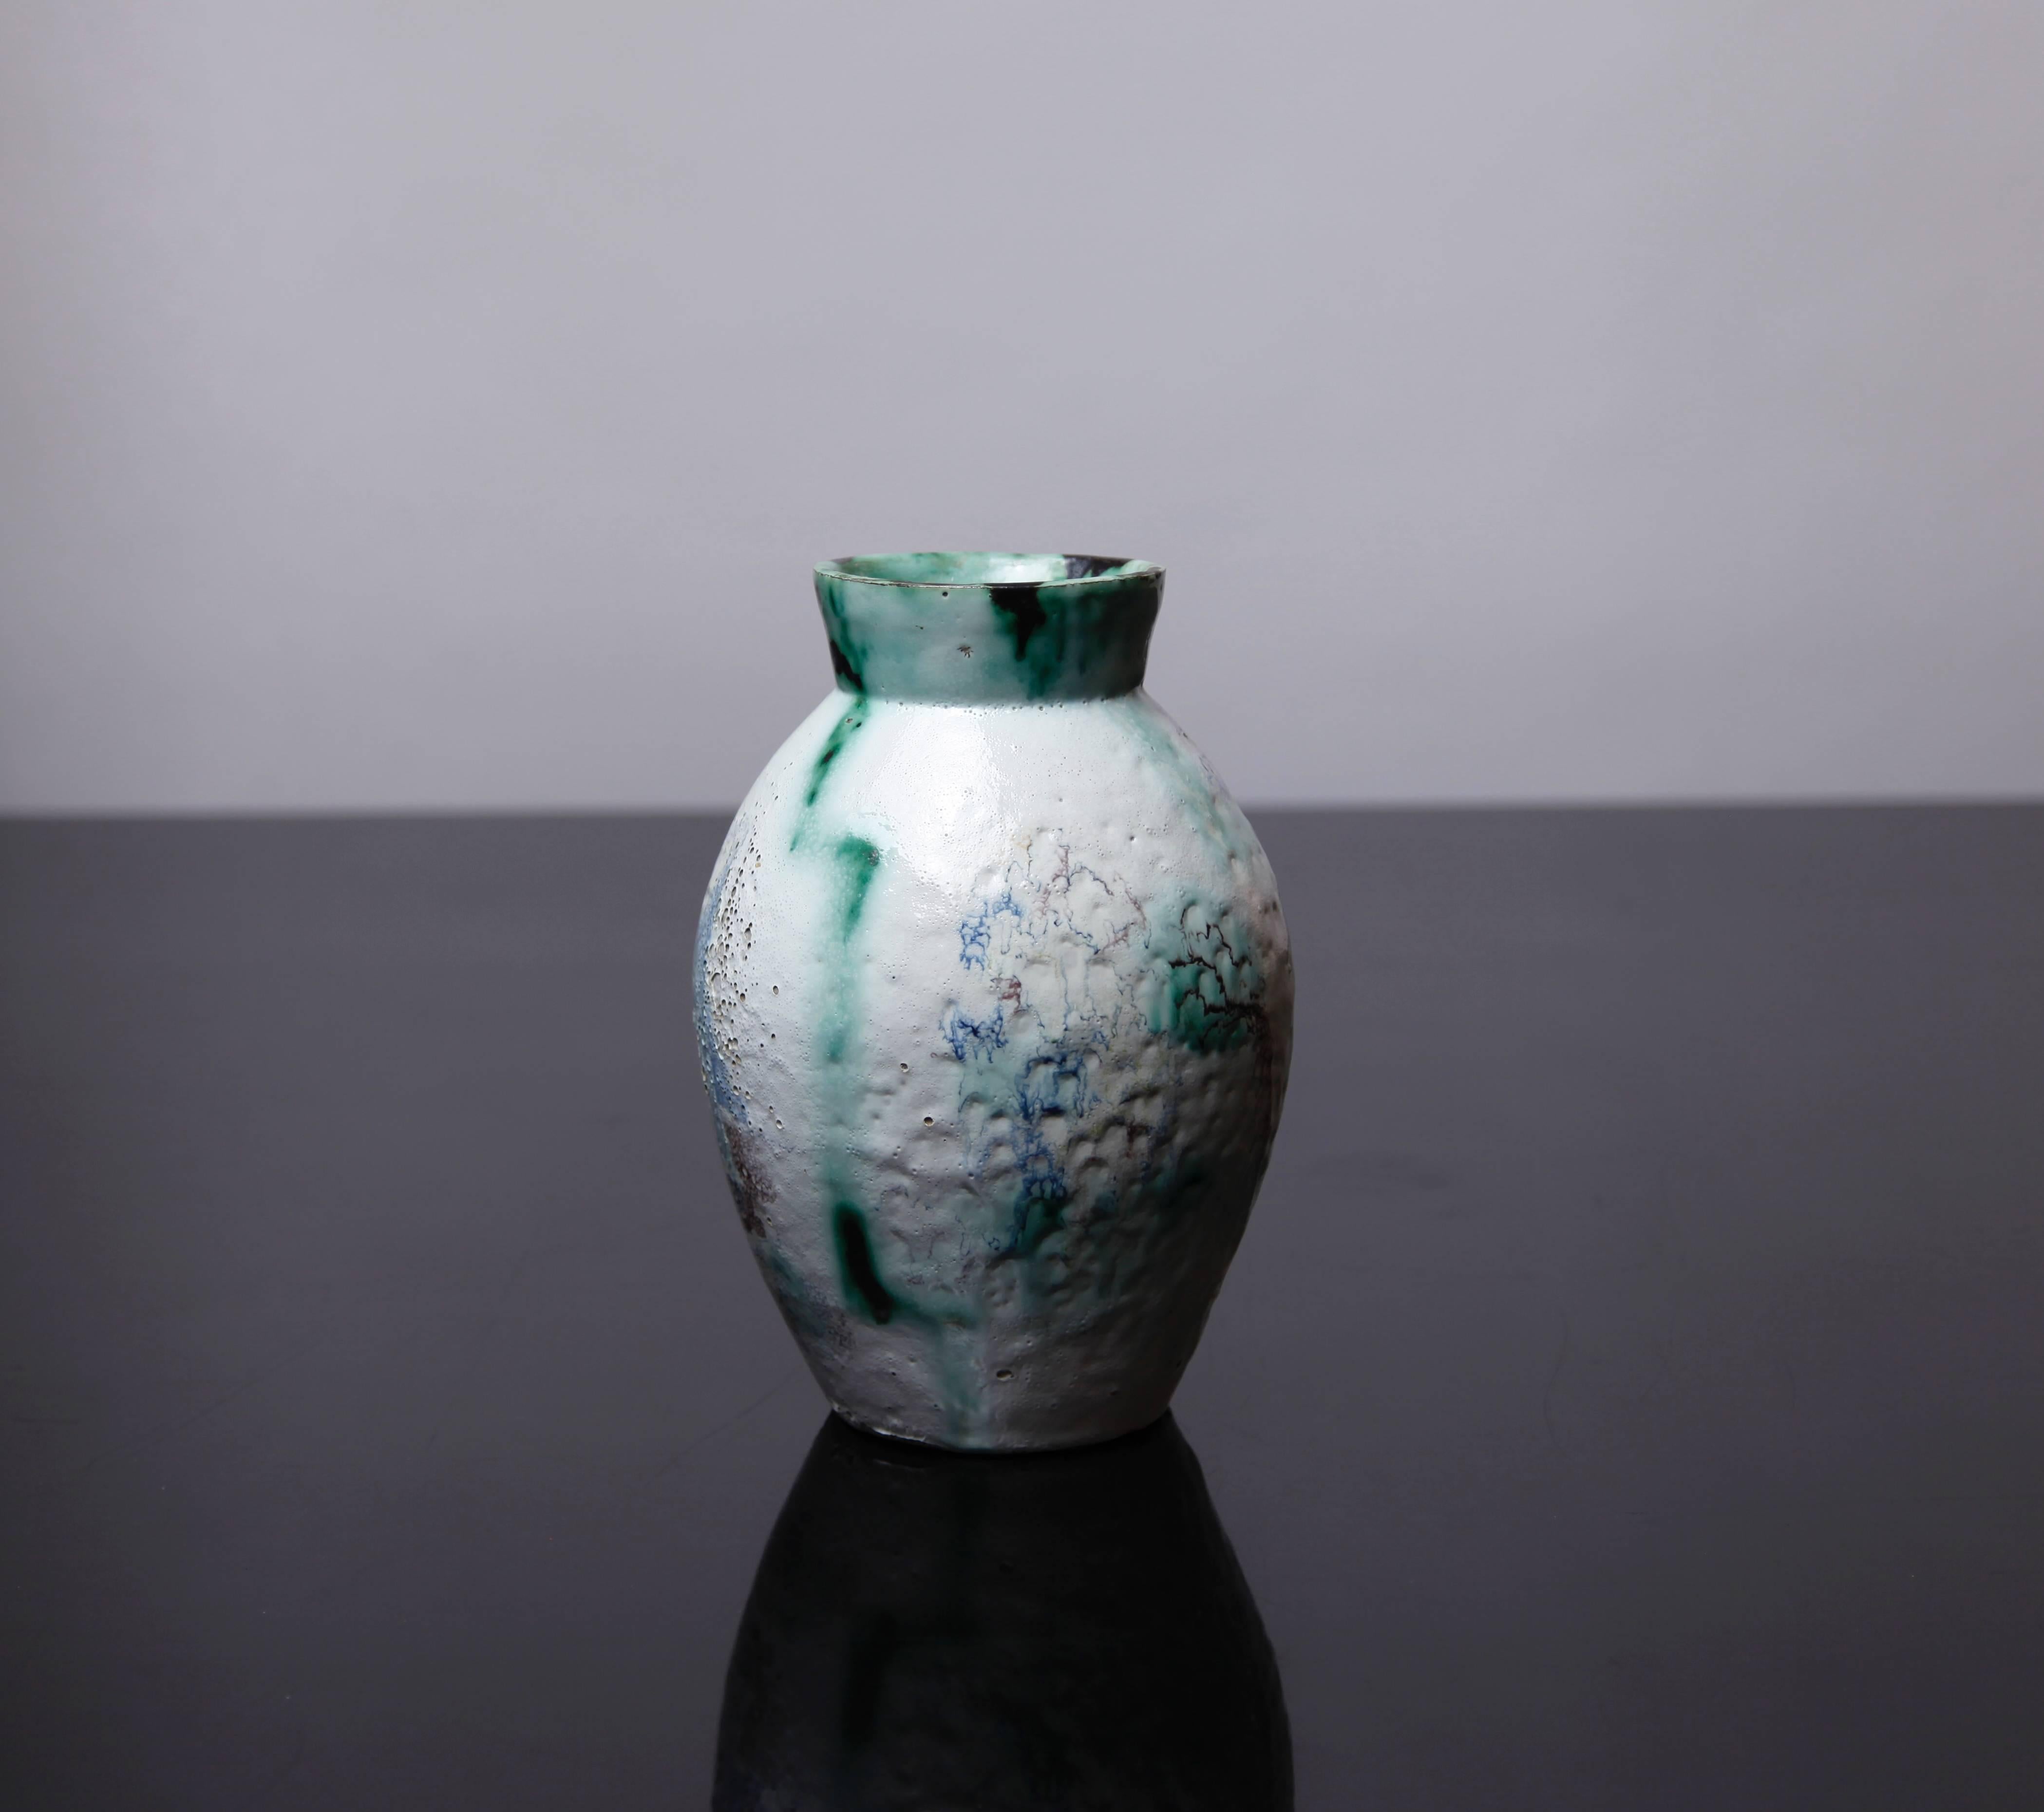 This ovoid-form vase is decorated with vivid aquatic blue and green glazes in a dynamic abstract design on white ground.